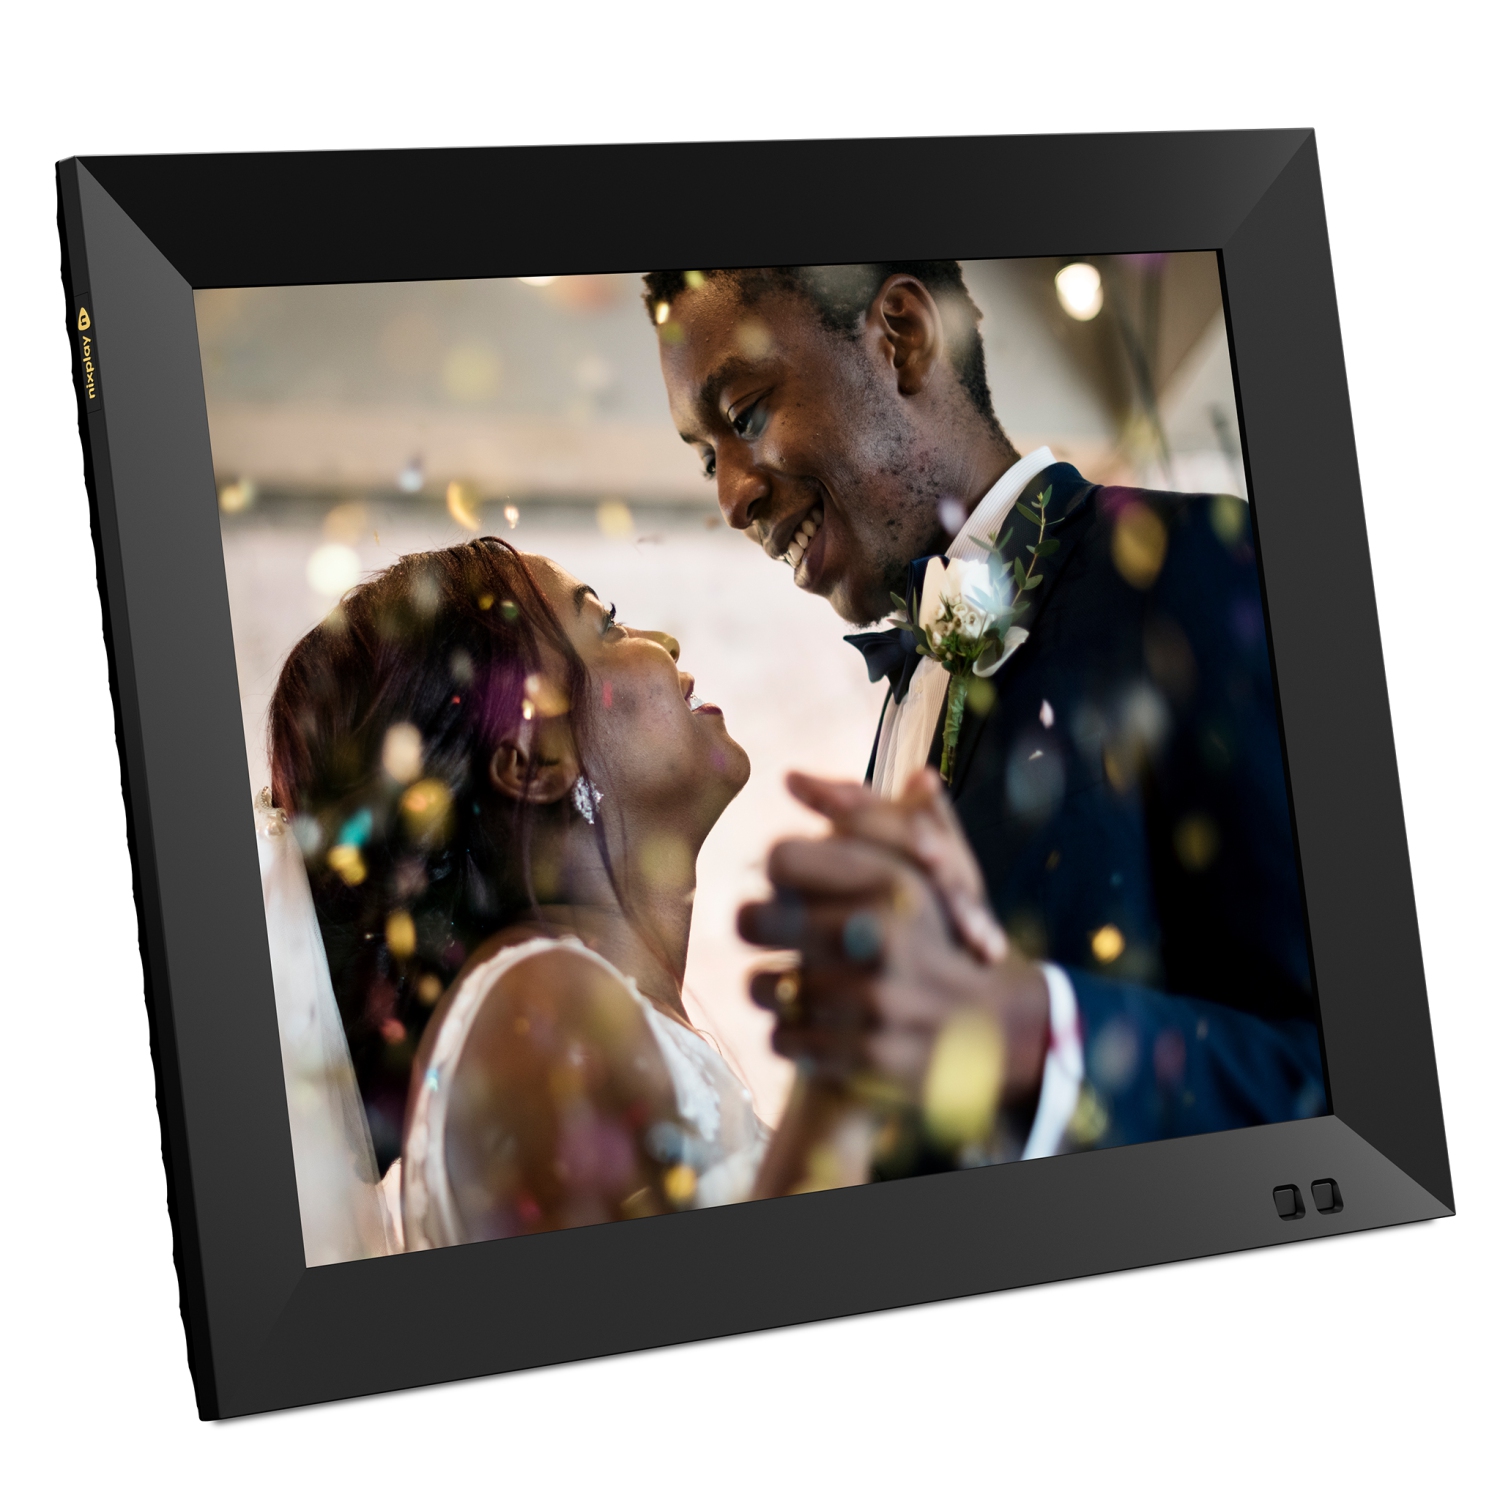 Nixplay 15 inch Smart Digital Photo Frame with WiFi (W15F) Black Share  Photos and Videos Instantly via Email or App Best Buy Canada